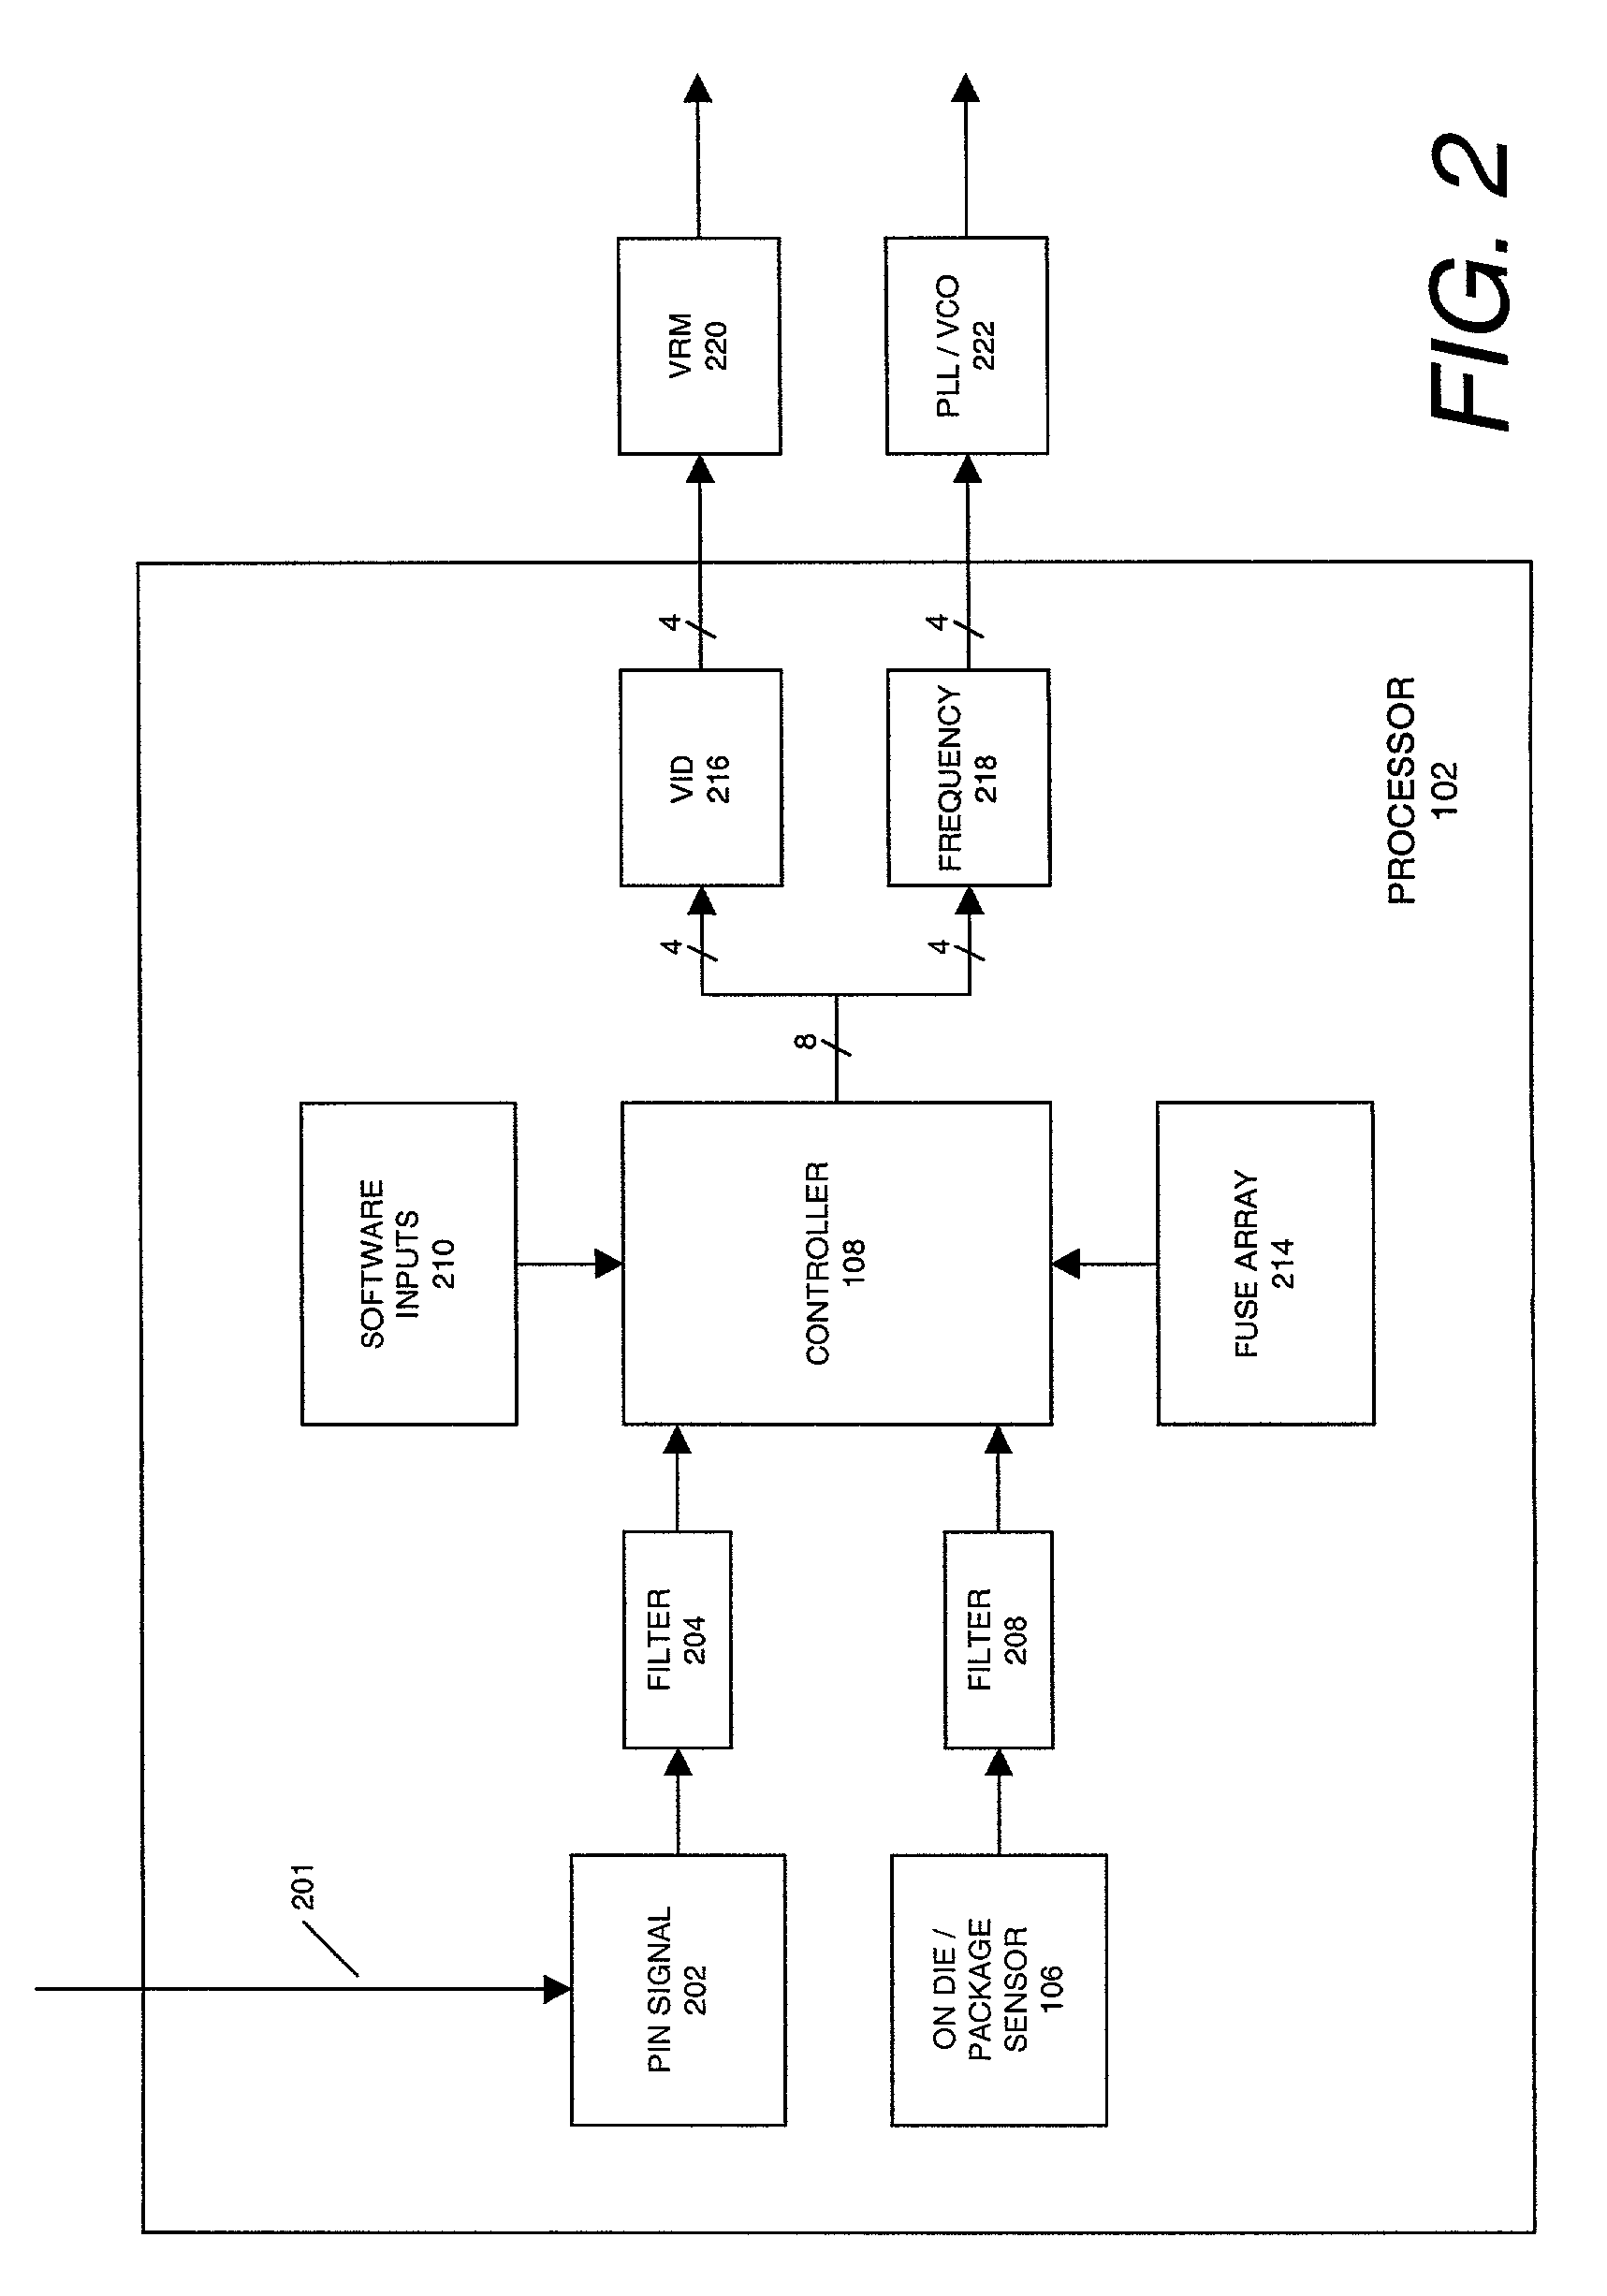 Method and apparatus for adjusting the voltage and frequency to minimize power dissipation in a multiprocessor system